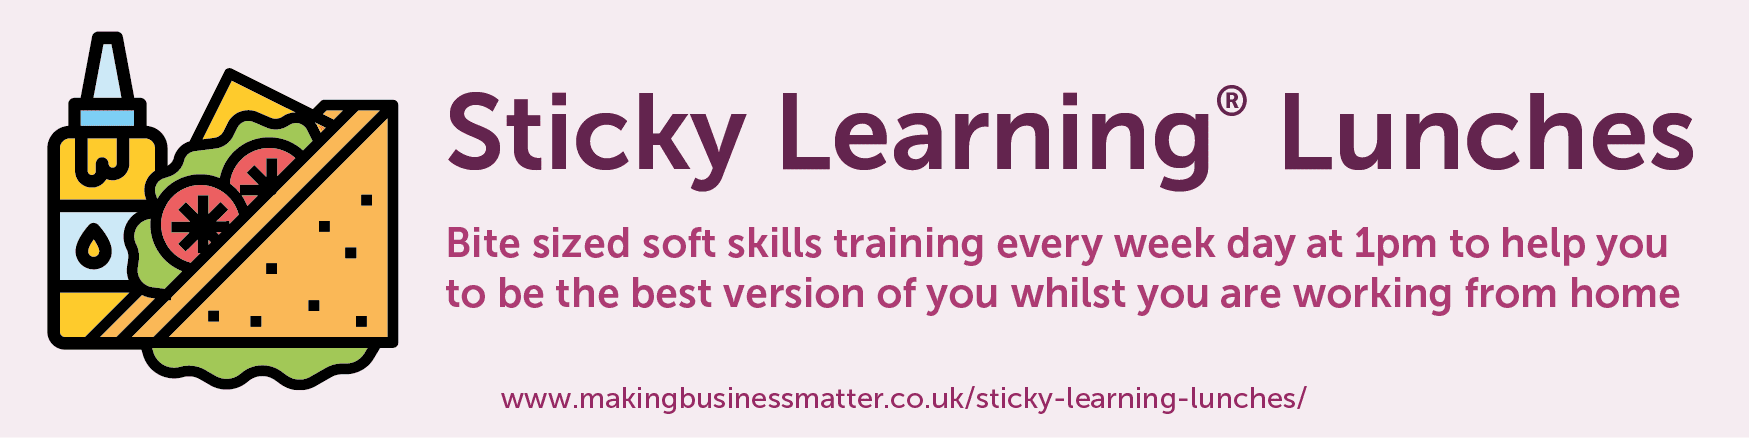 MBM banner titled Sticky Learning Lunches with sandwich and drink icon